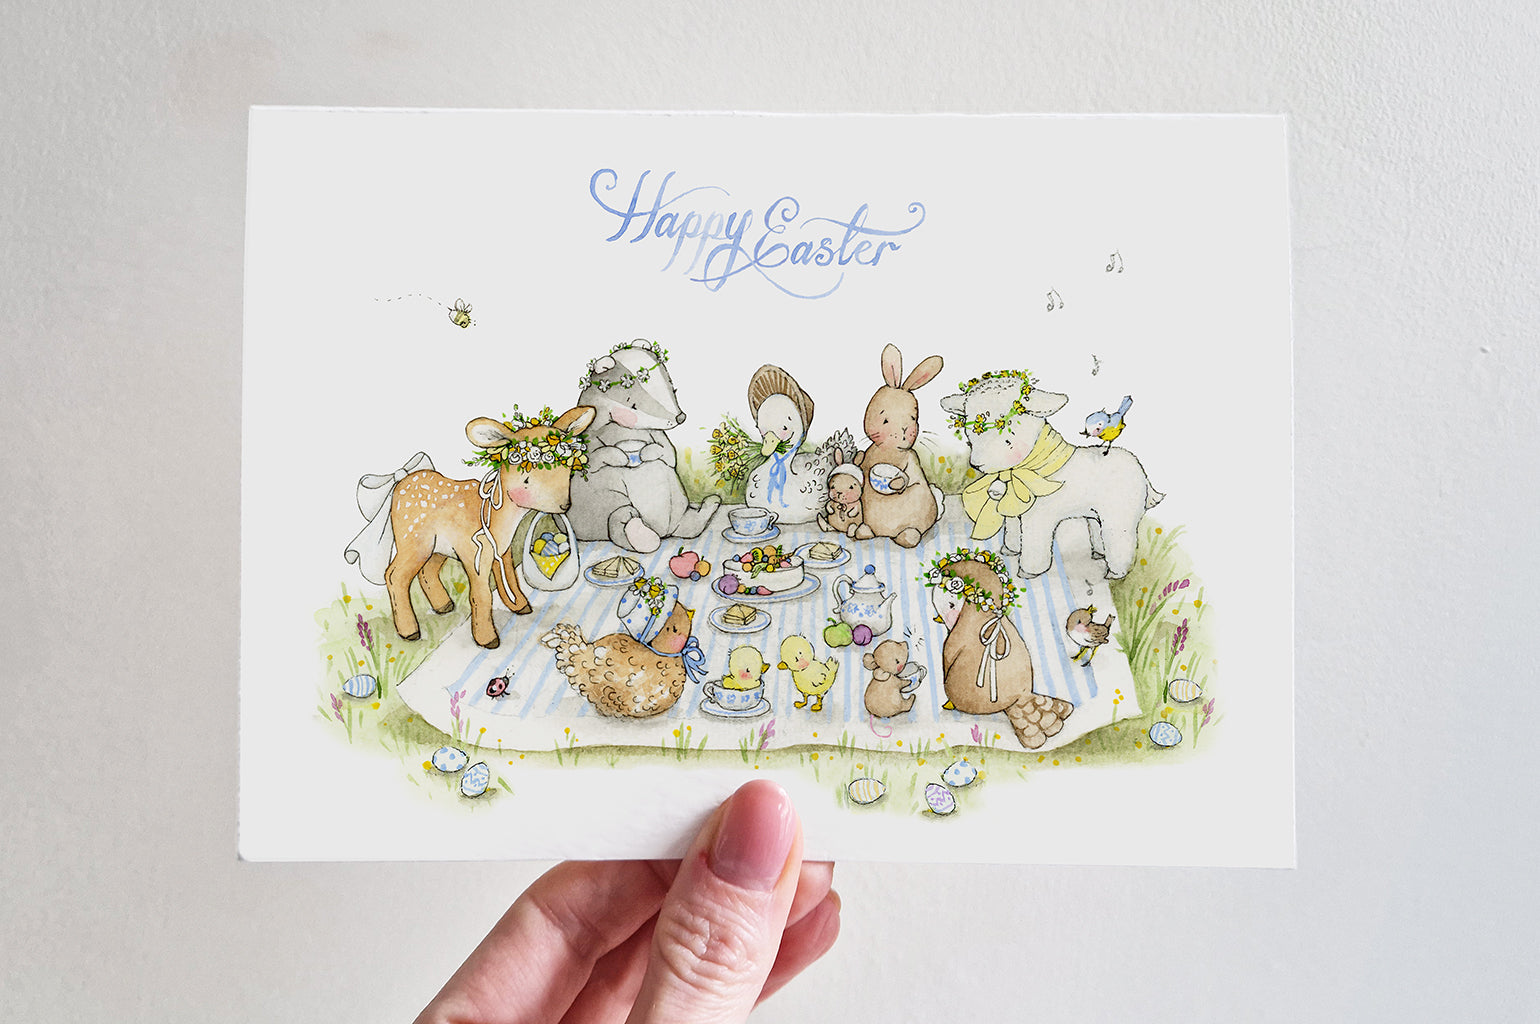 Illustrated happy easter picnic greetings card